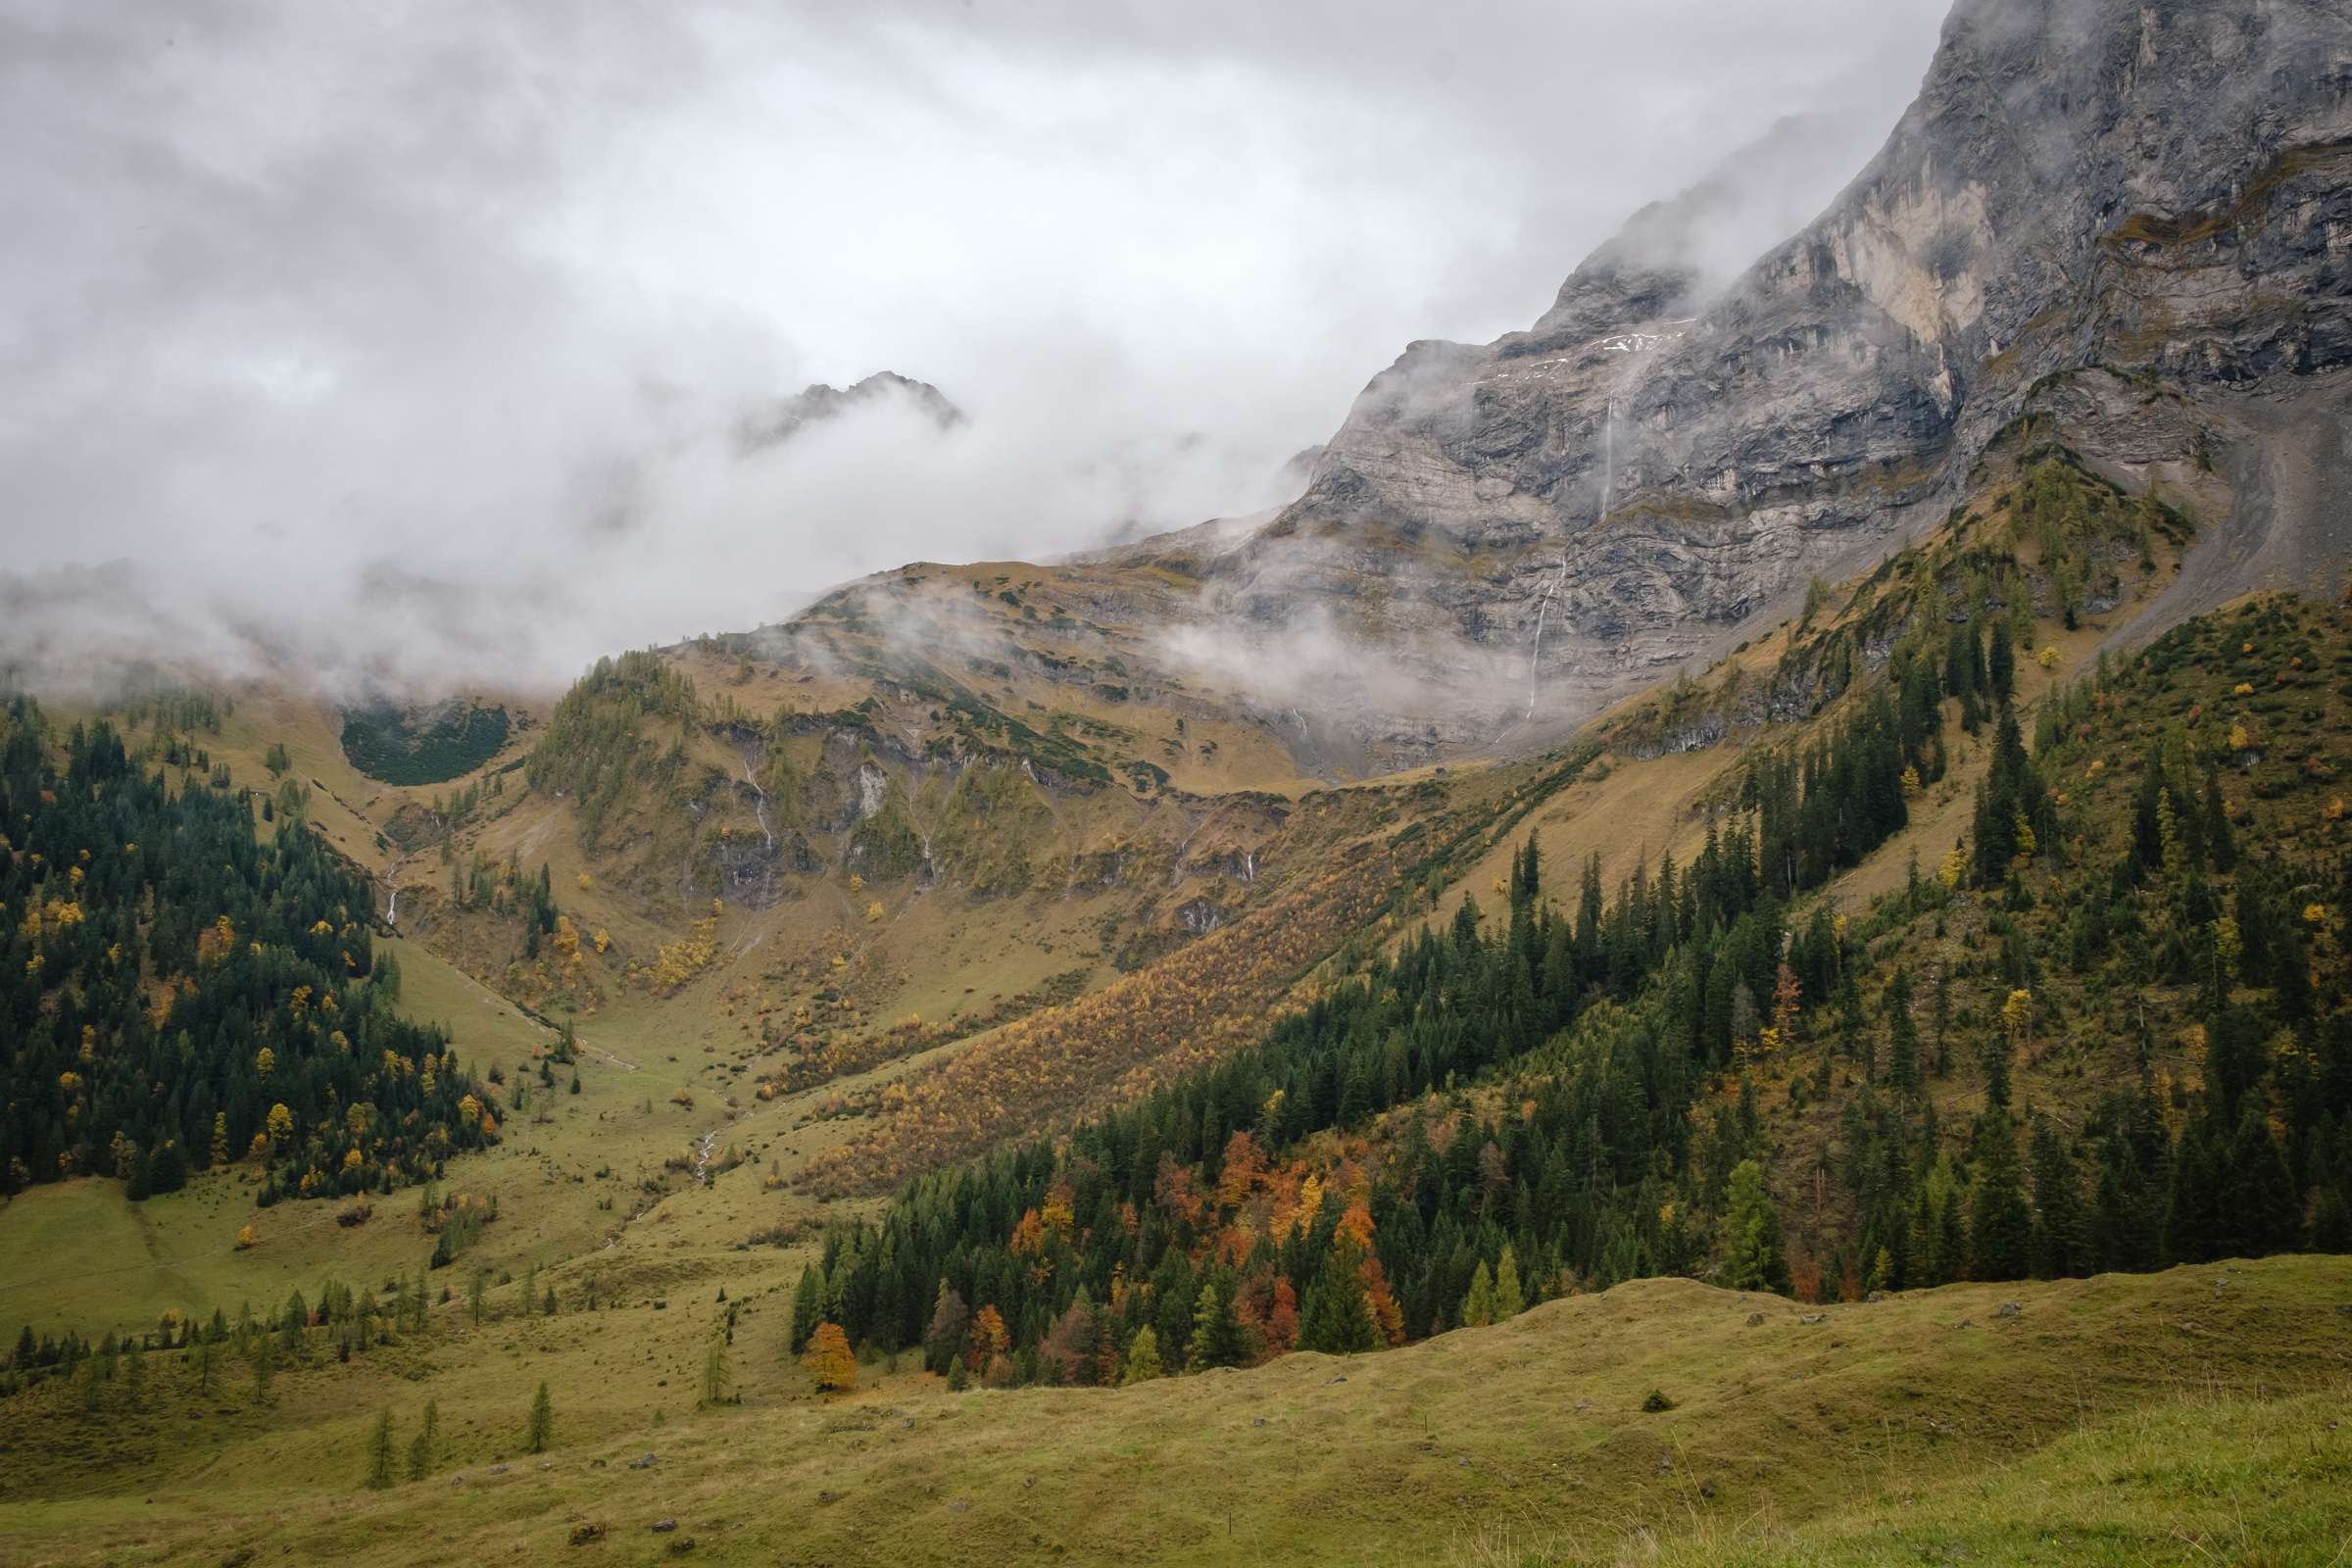 Green pastures and cloudy peaks, waterfalls and forests everywhere in the Karwendel mountains